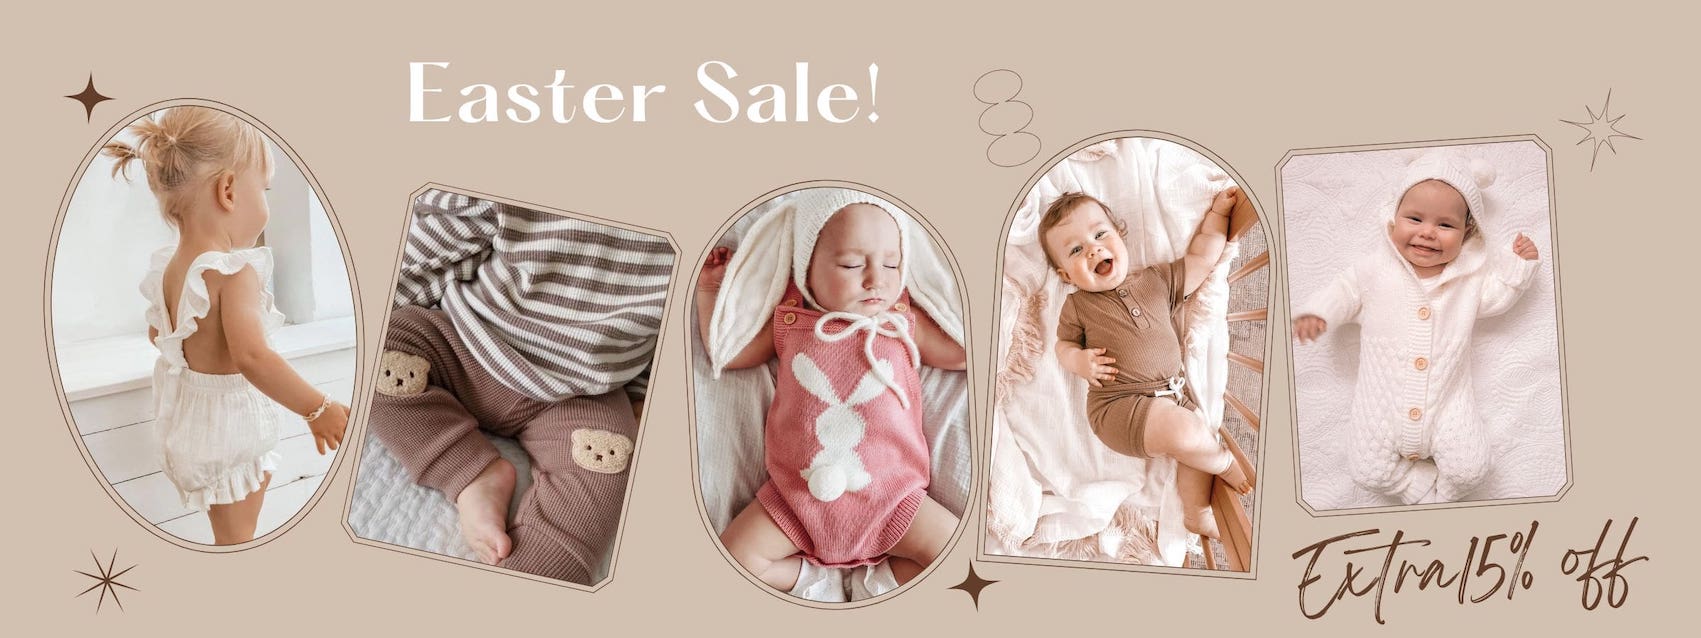 Baby clothes Australia - shop Lulu Babe's Easter sale